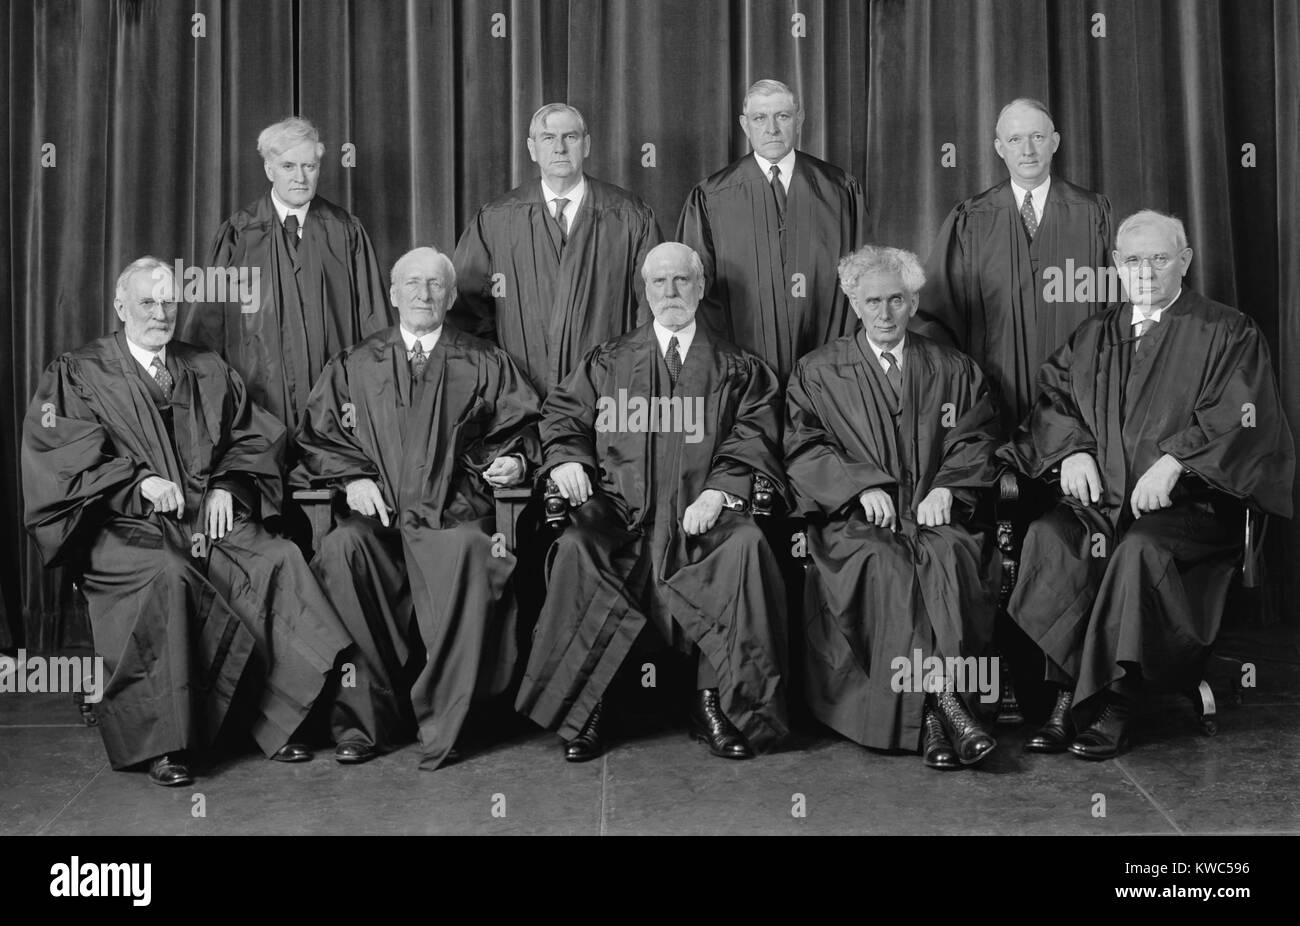 The Justices of the Supreme Court, 1937-38. Sitting, from left to right, Justices George Sutherland, James McReynolds, Chief Justice Charles Evans Hughes, Justices Louis Brandeis and Pierce Butler. Standing, left to right, Justices Benjamin Cardozo, Harlan Stone, Owen Roberts, and Hugo Black. (BSLOC_2015_14_15) Stock Photo